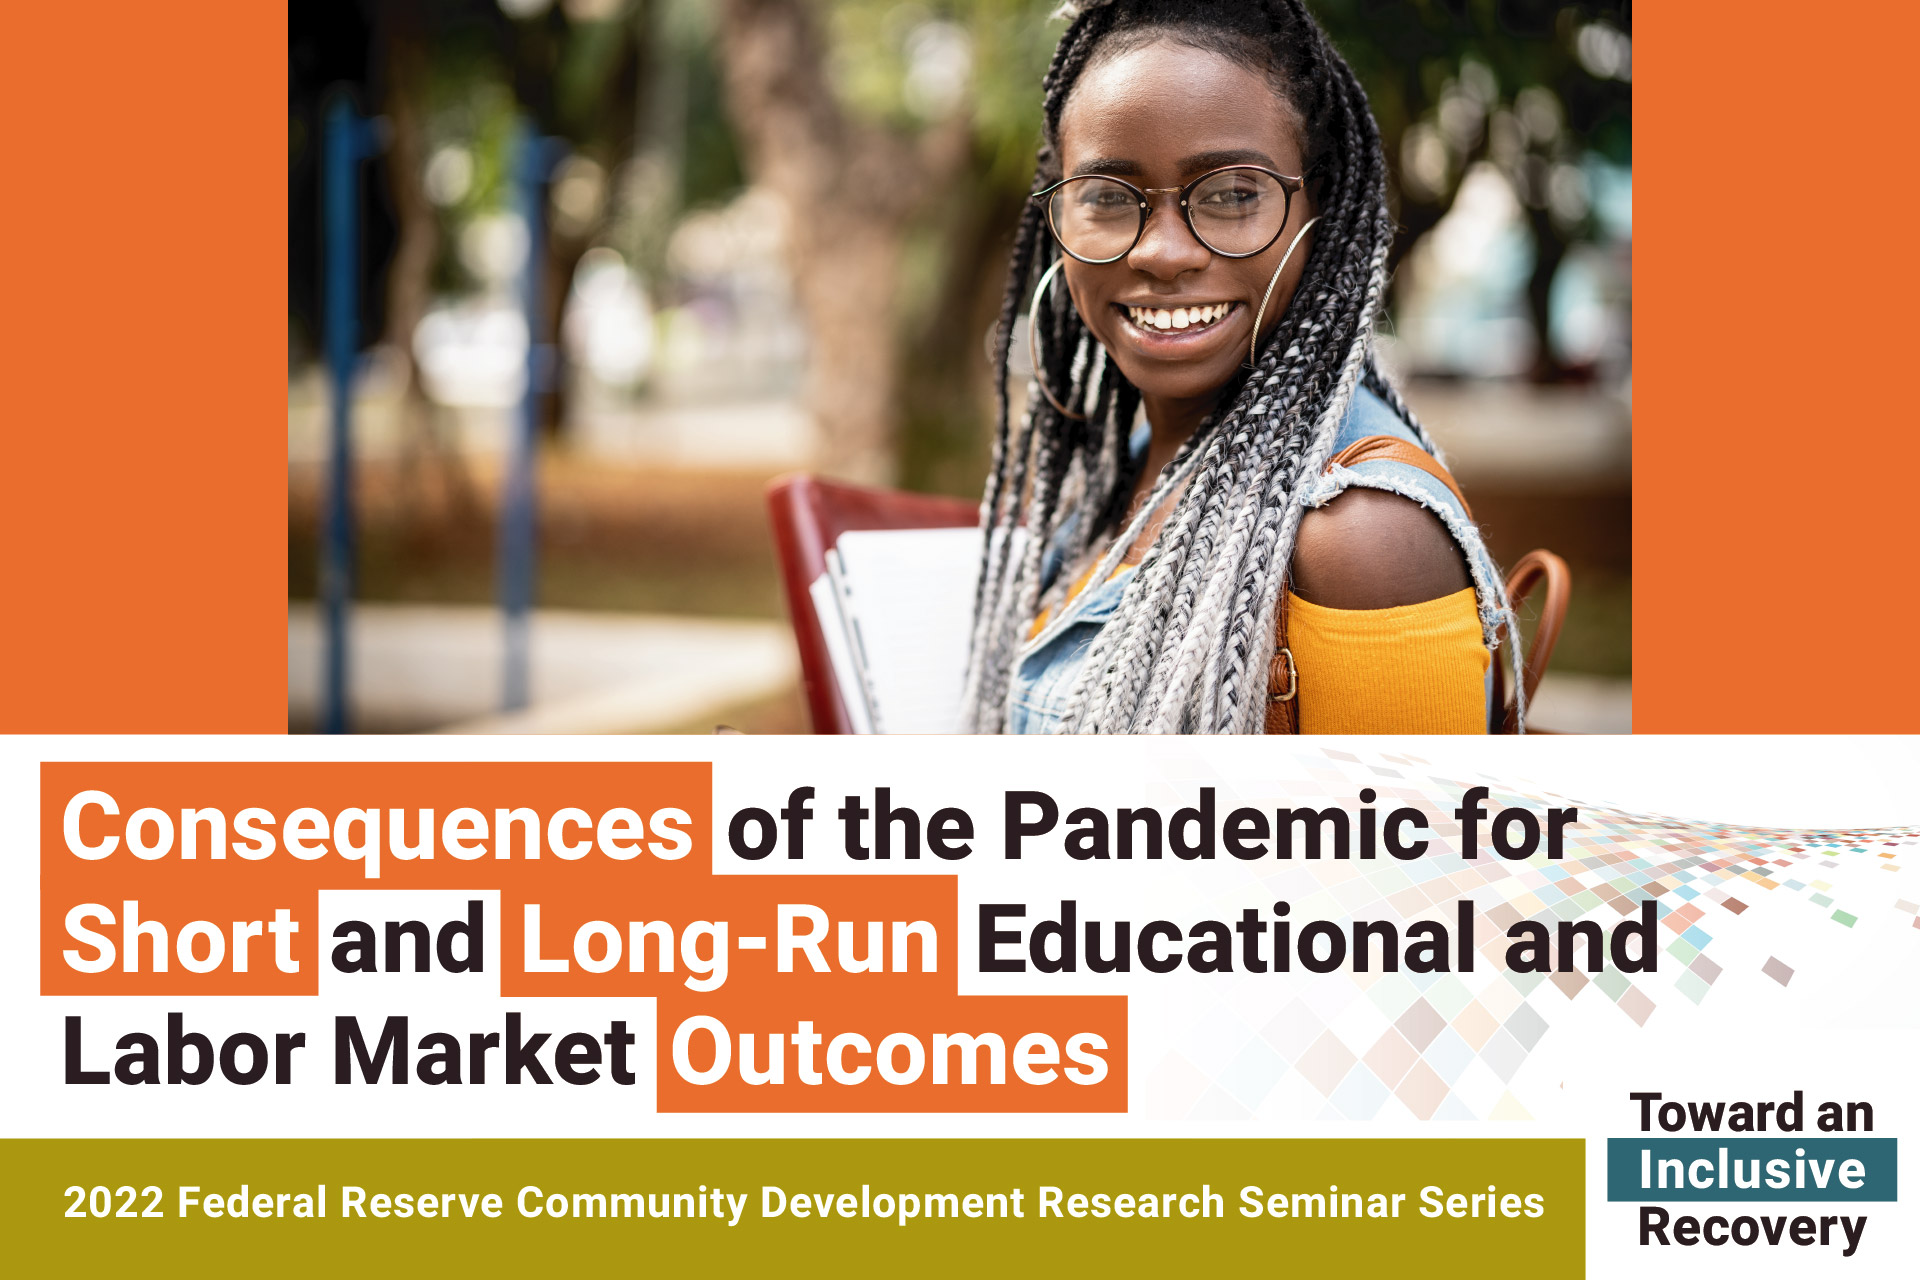 Consequences of the Pandemic for Short and Long-Run Educational and Labor Market Outcomes